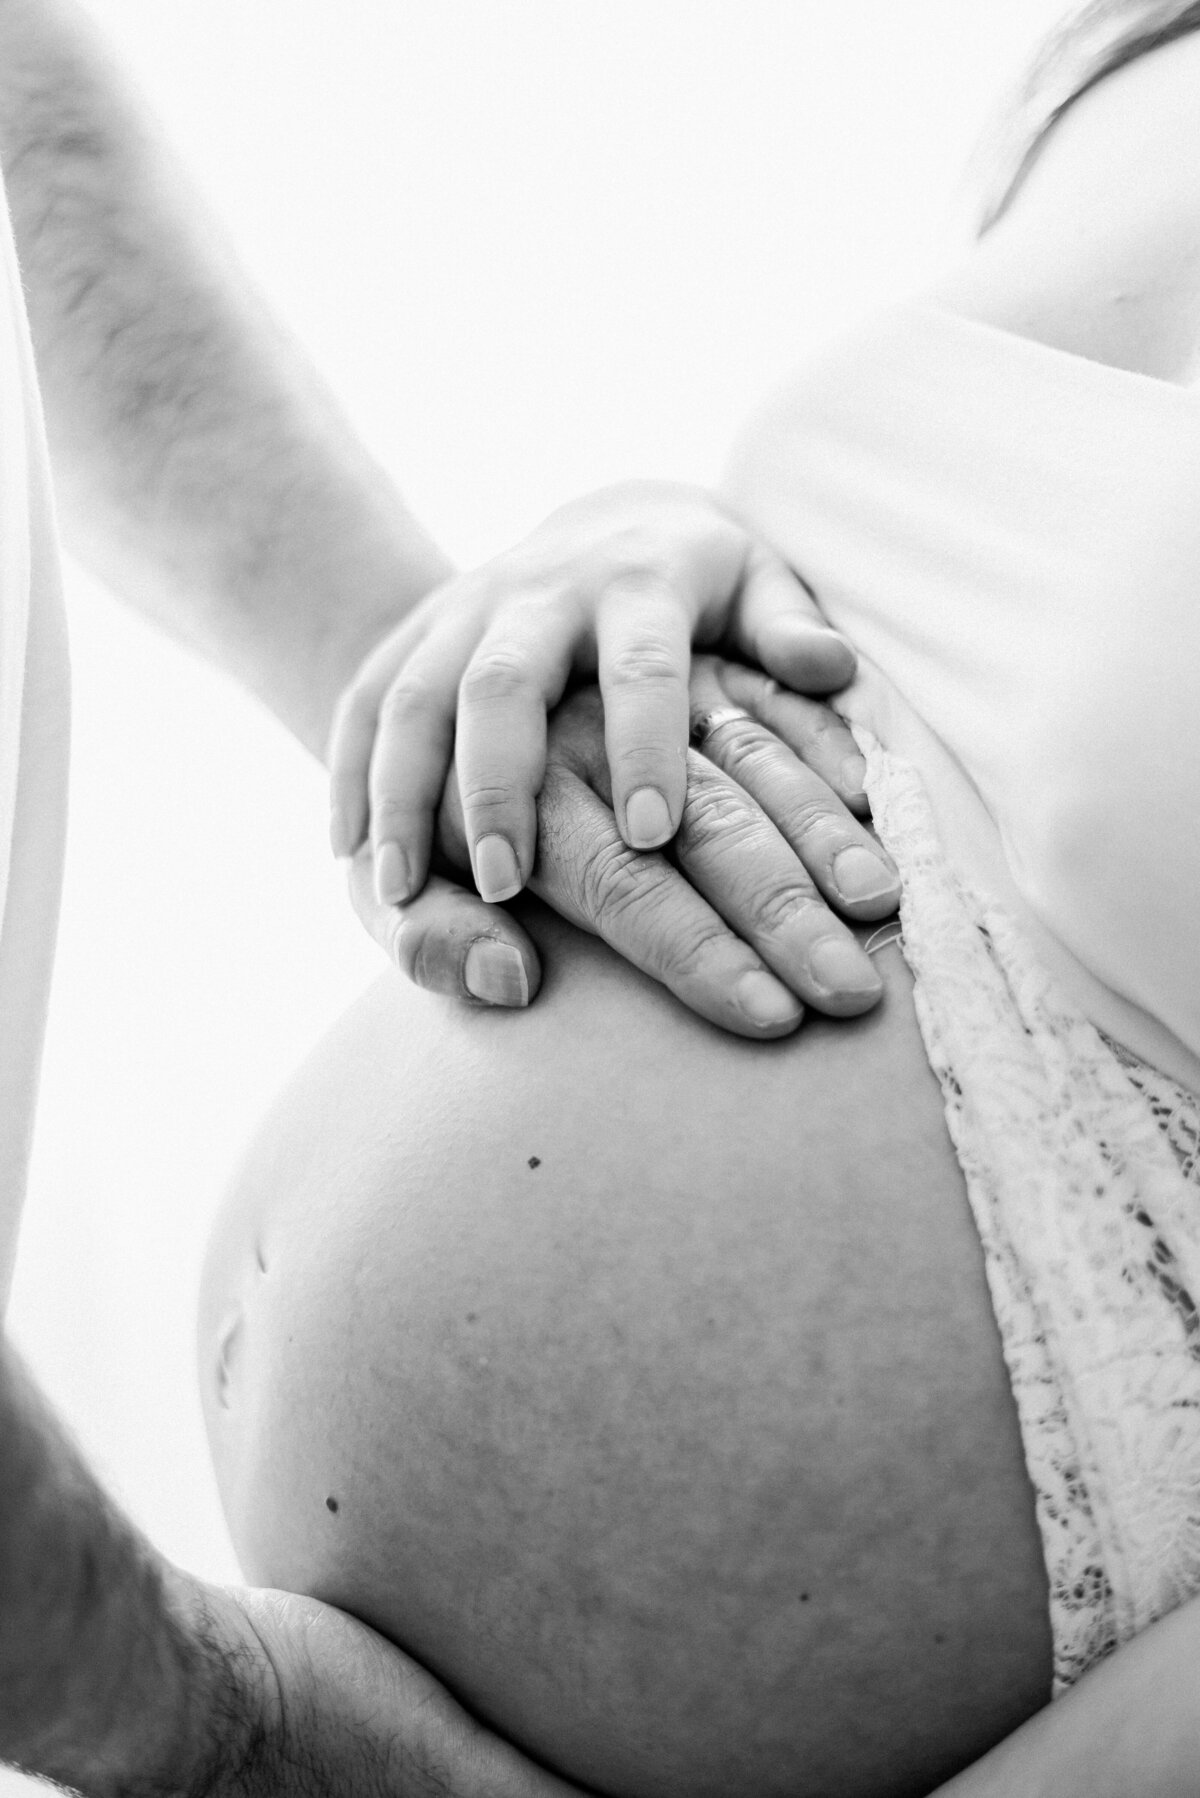 Mum and dad holding pregnant bump during billingshurst maternity photoshoot